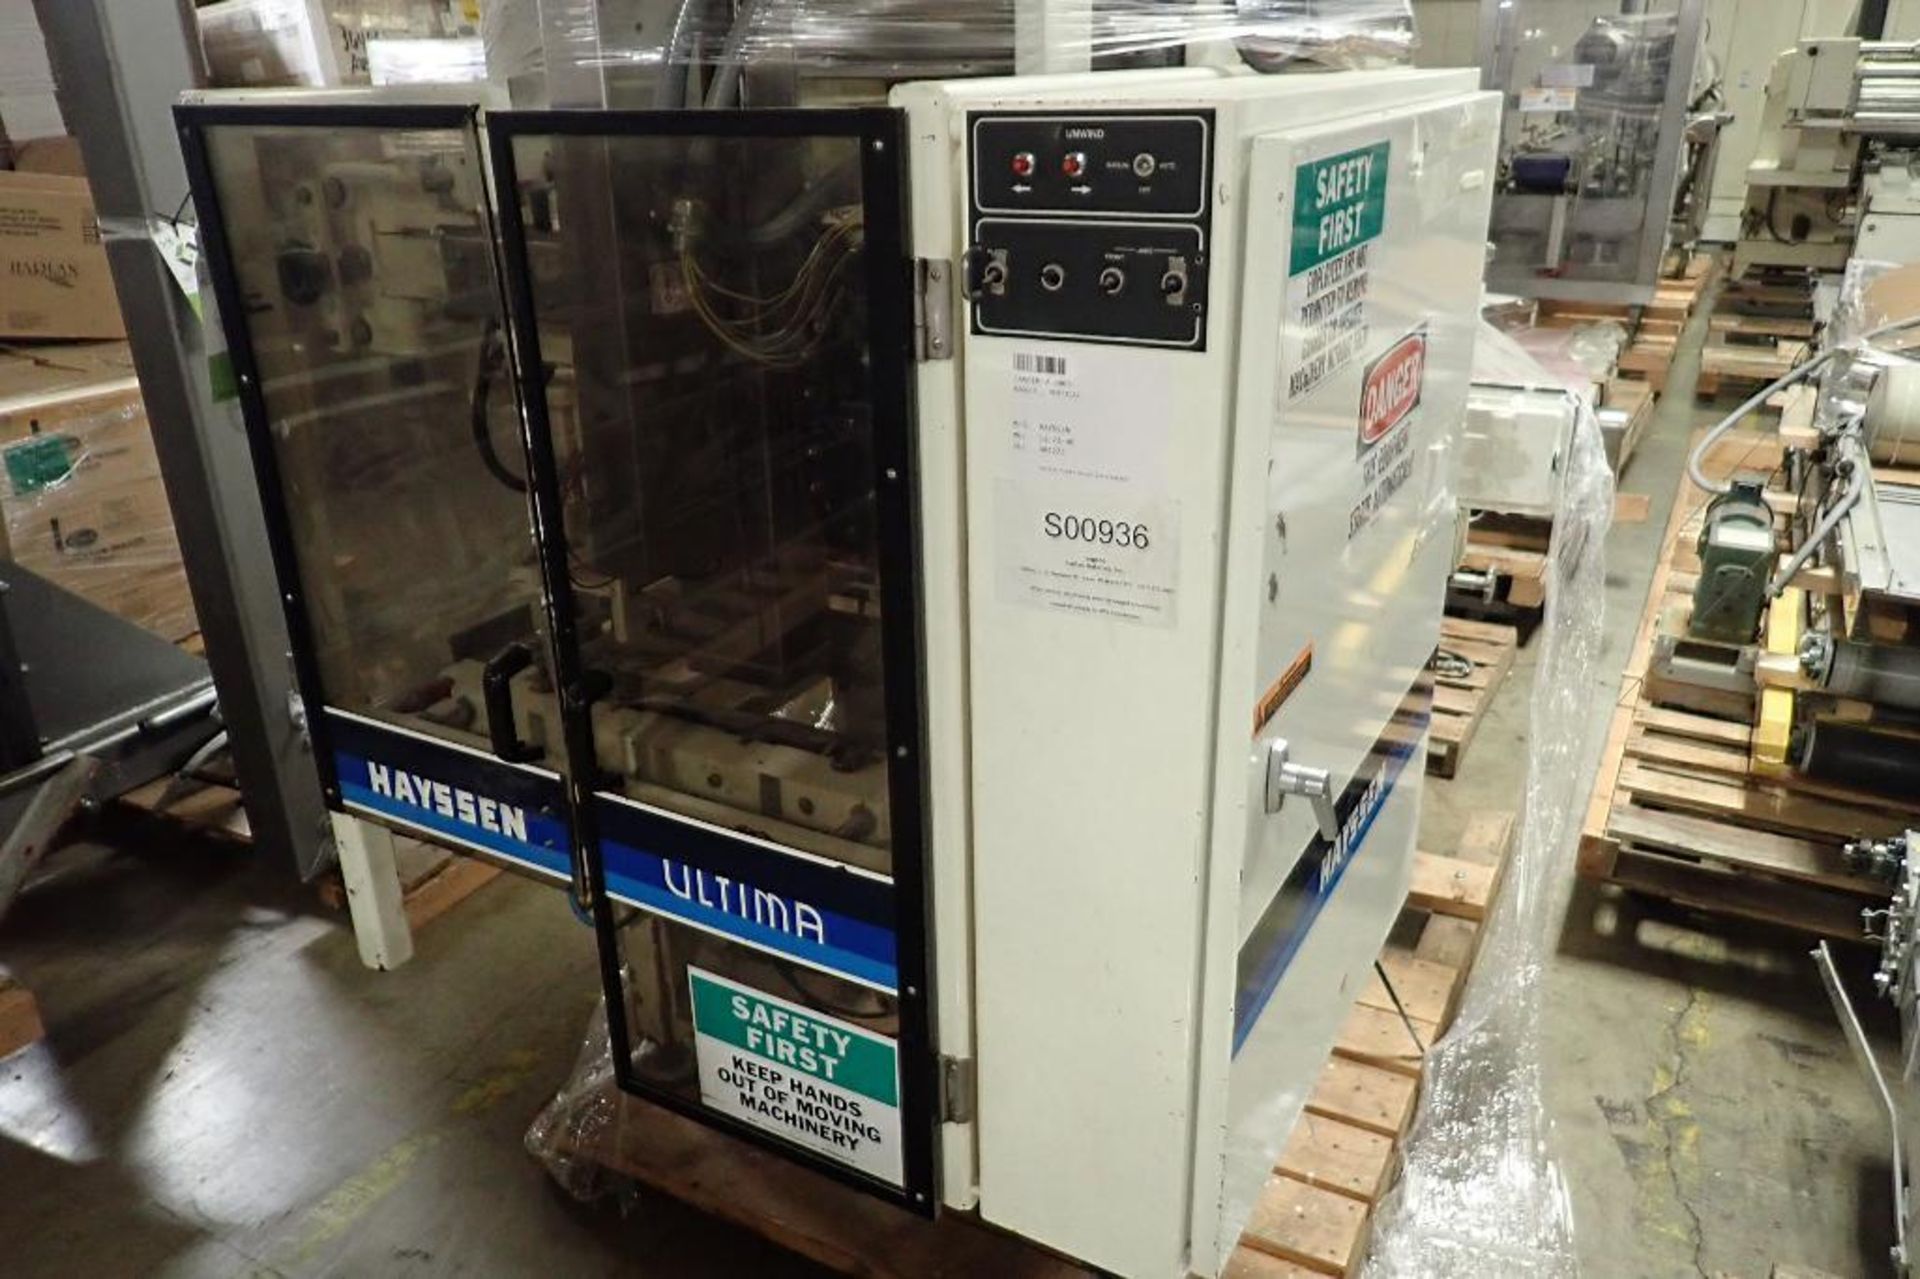 1994 Hayssen Yamato data weigh 8 head scale, Model ADW-508MD, SN 084026/930442, 8 g to 1000 g capaci - Image 22 of 34